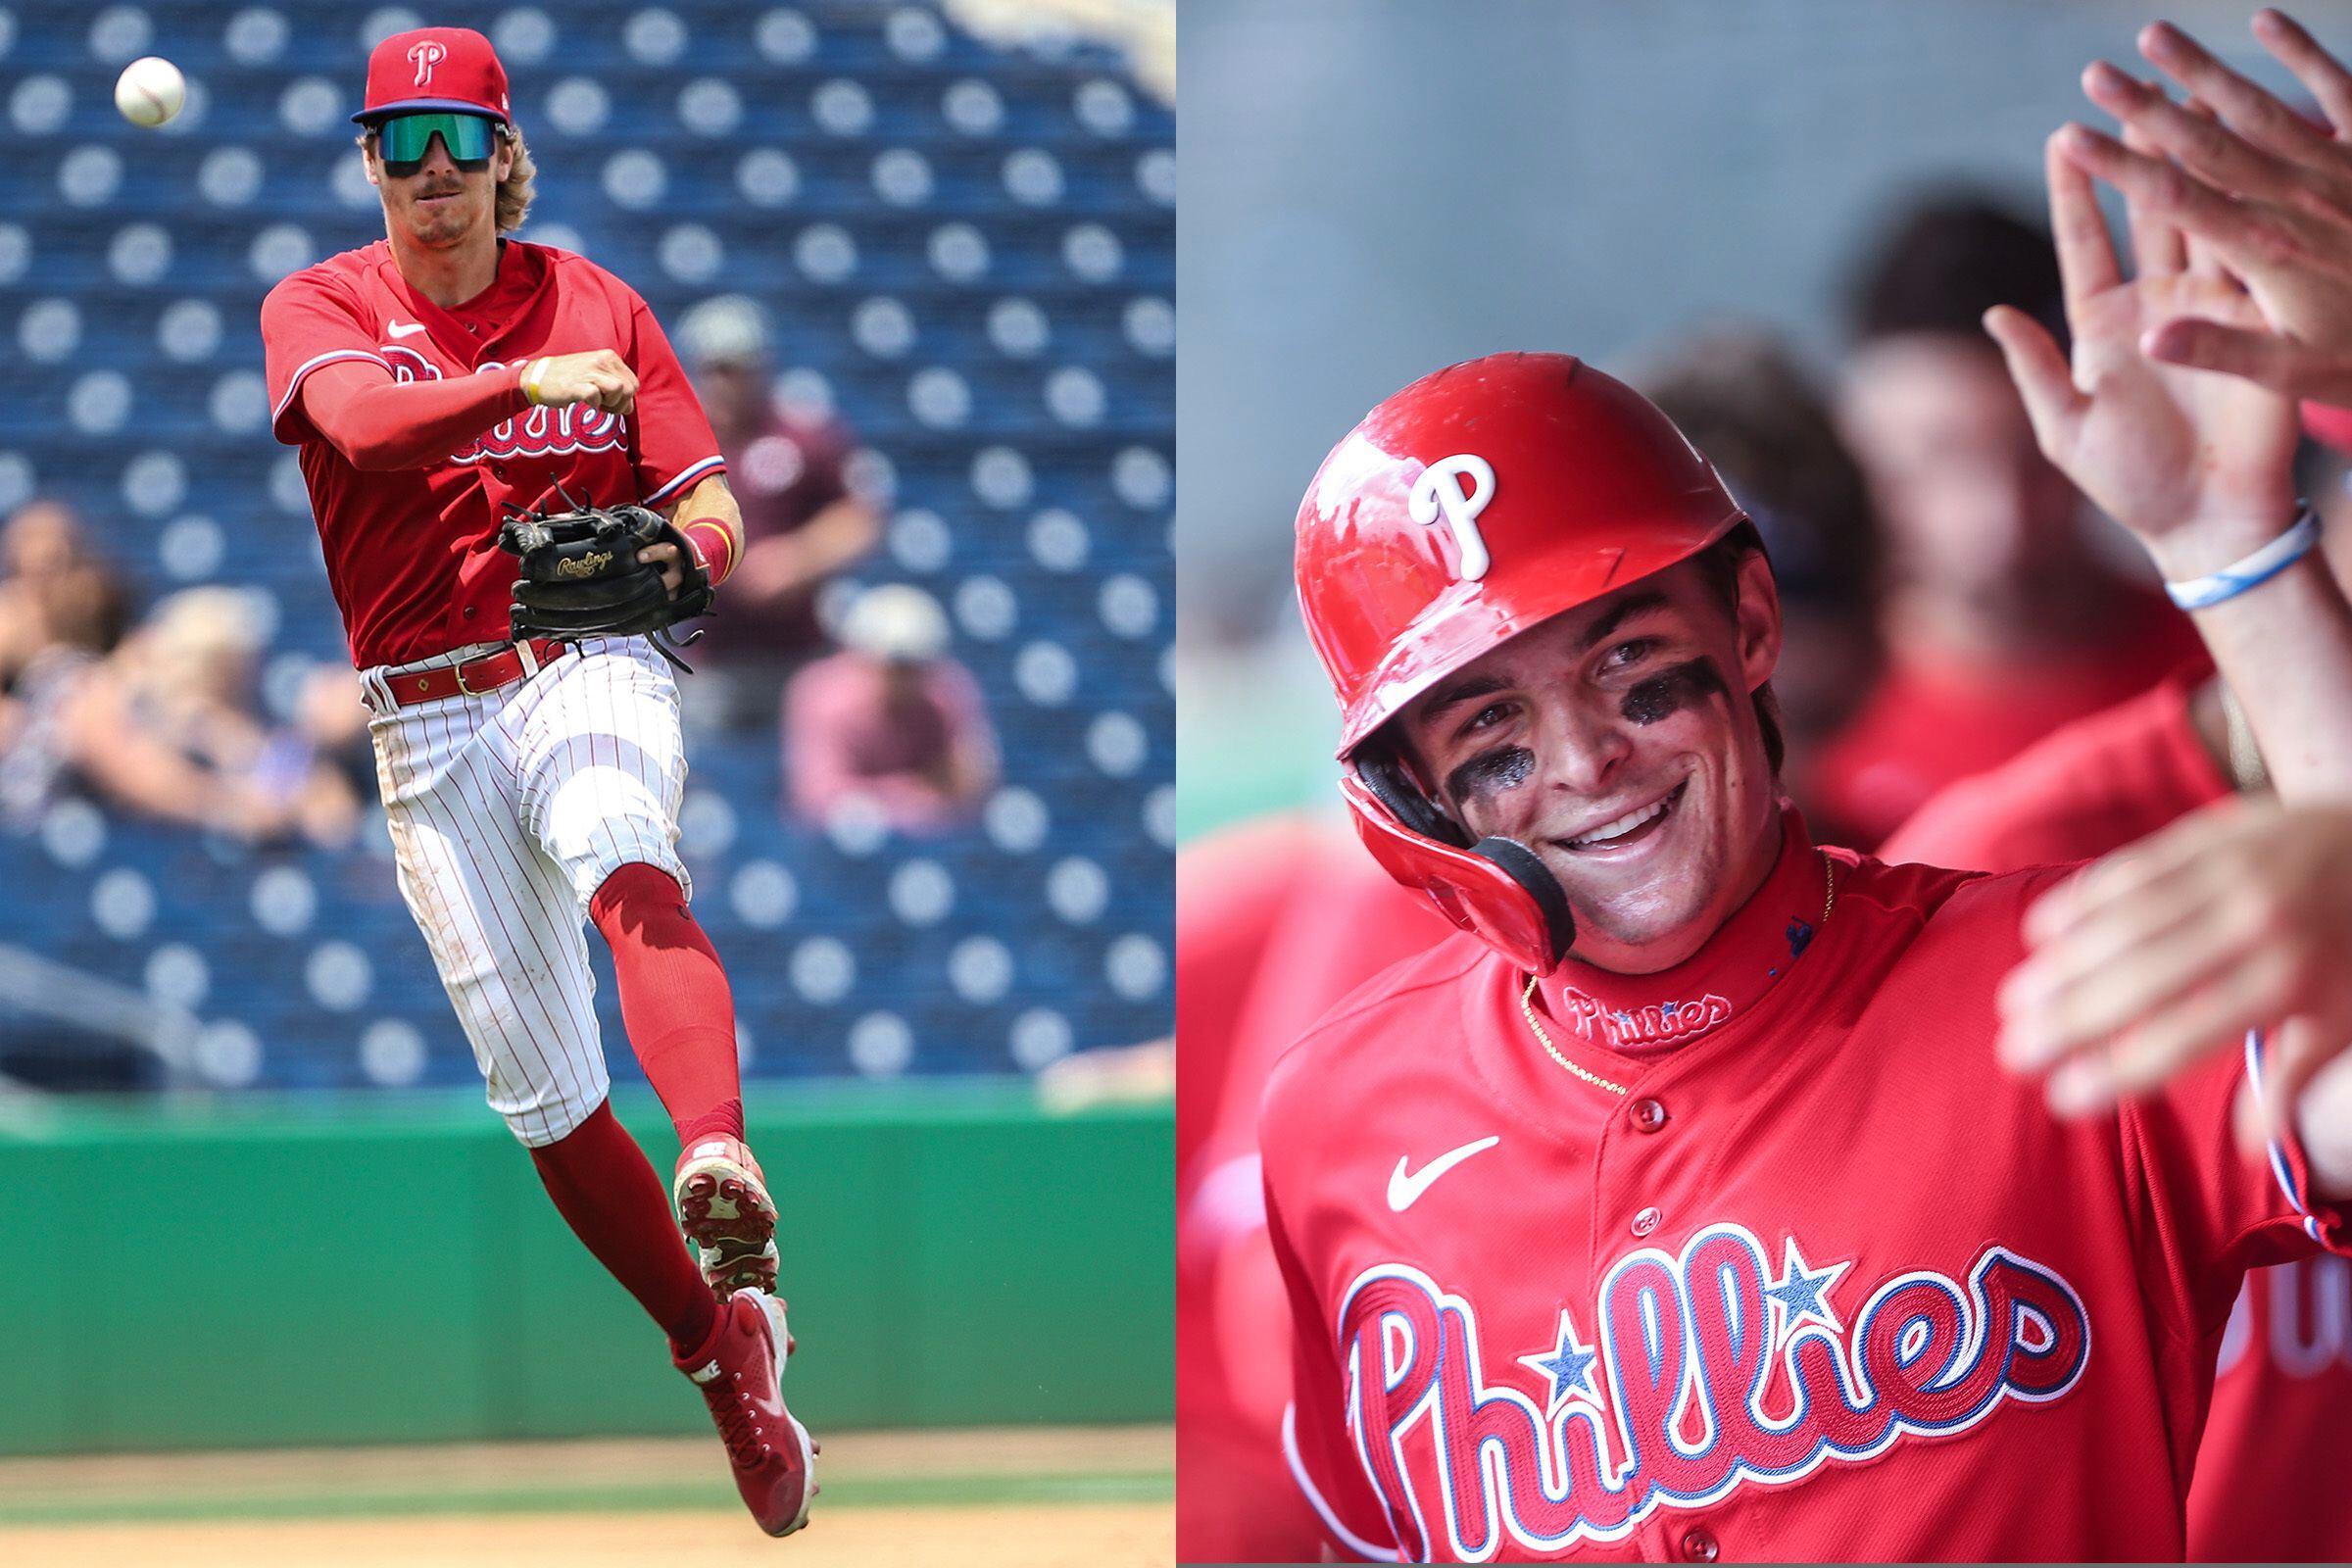 Philadelphia Phillies' unexpected uniform changes are out of their hands